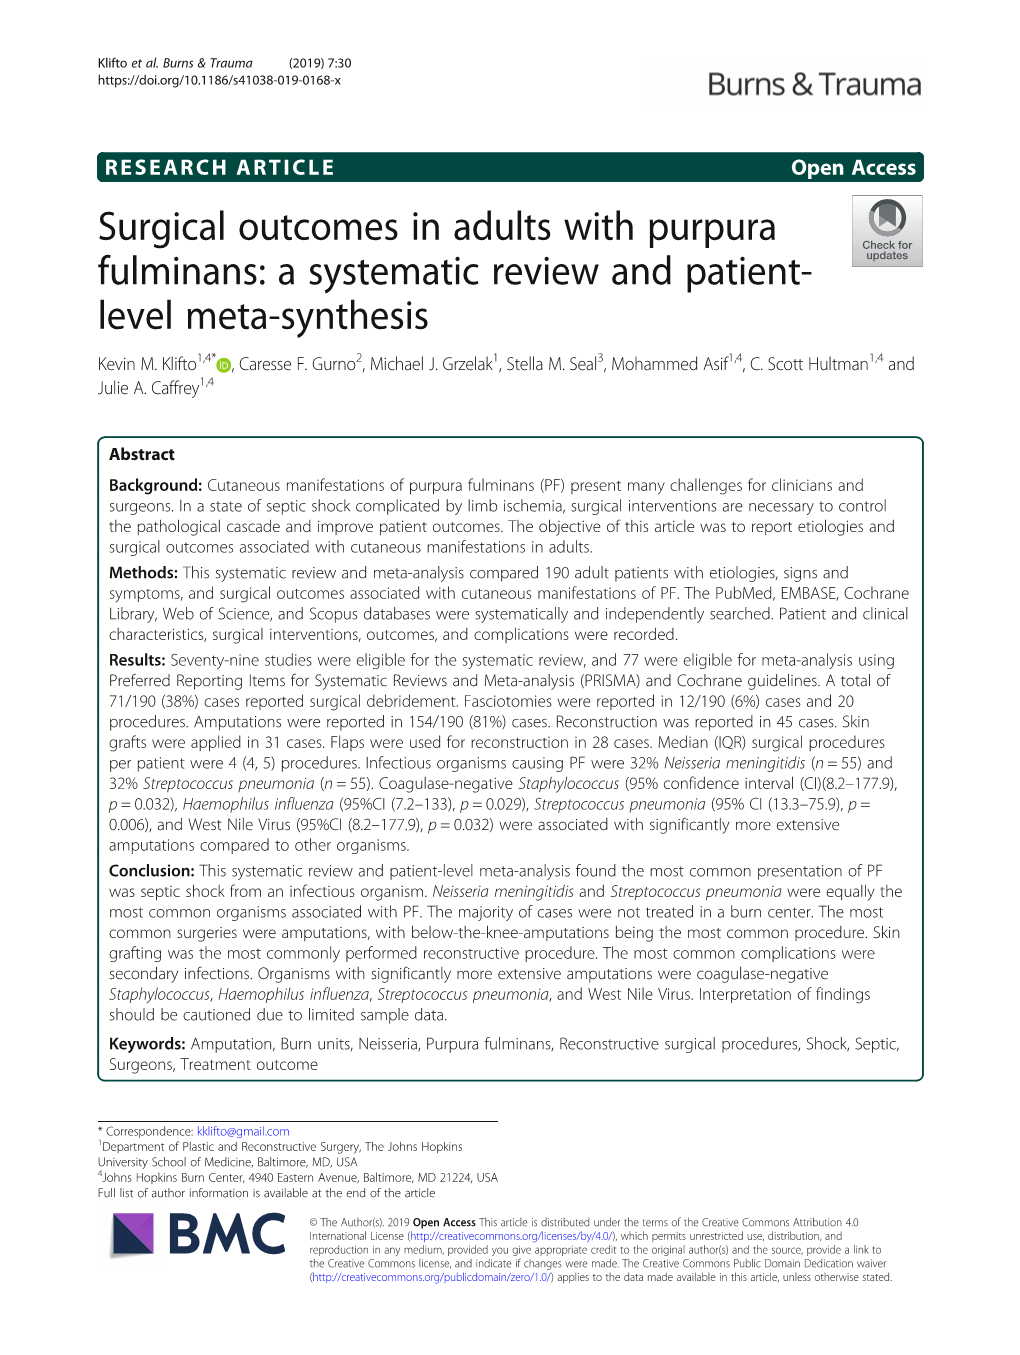 Surgical Outcomes in Adults with Purpura Fulminans: a Systematic Review and Patient- Level Meta-Synthesis Kevin M